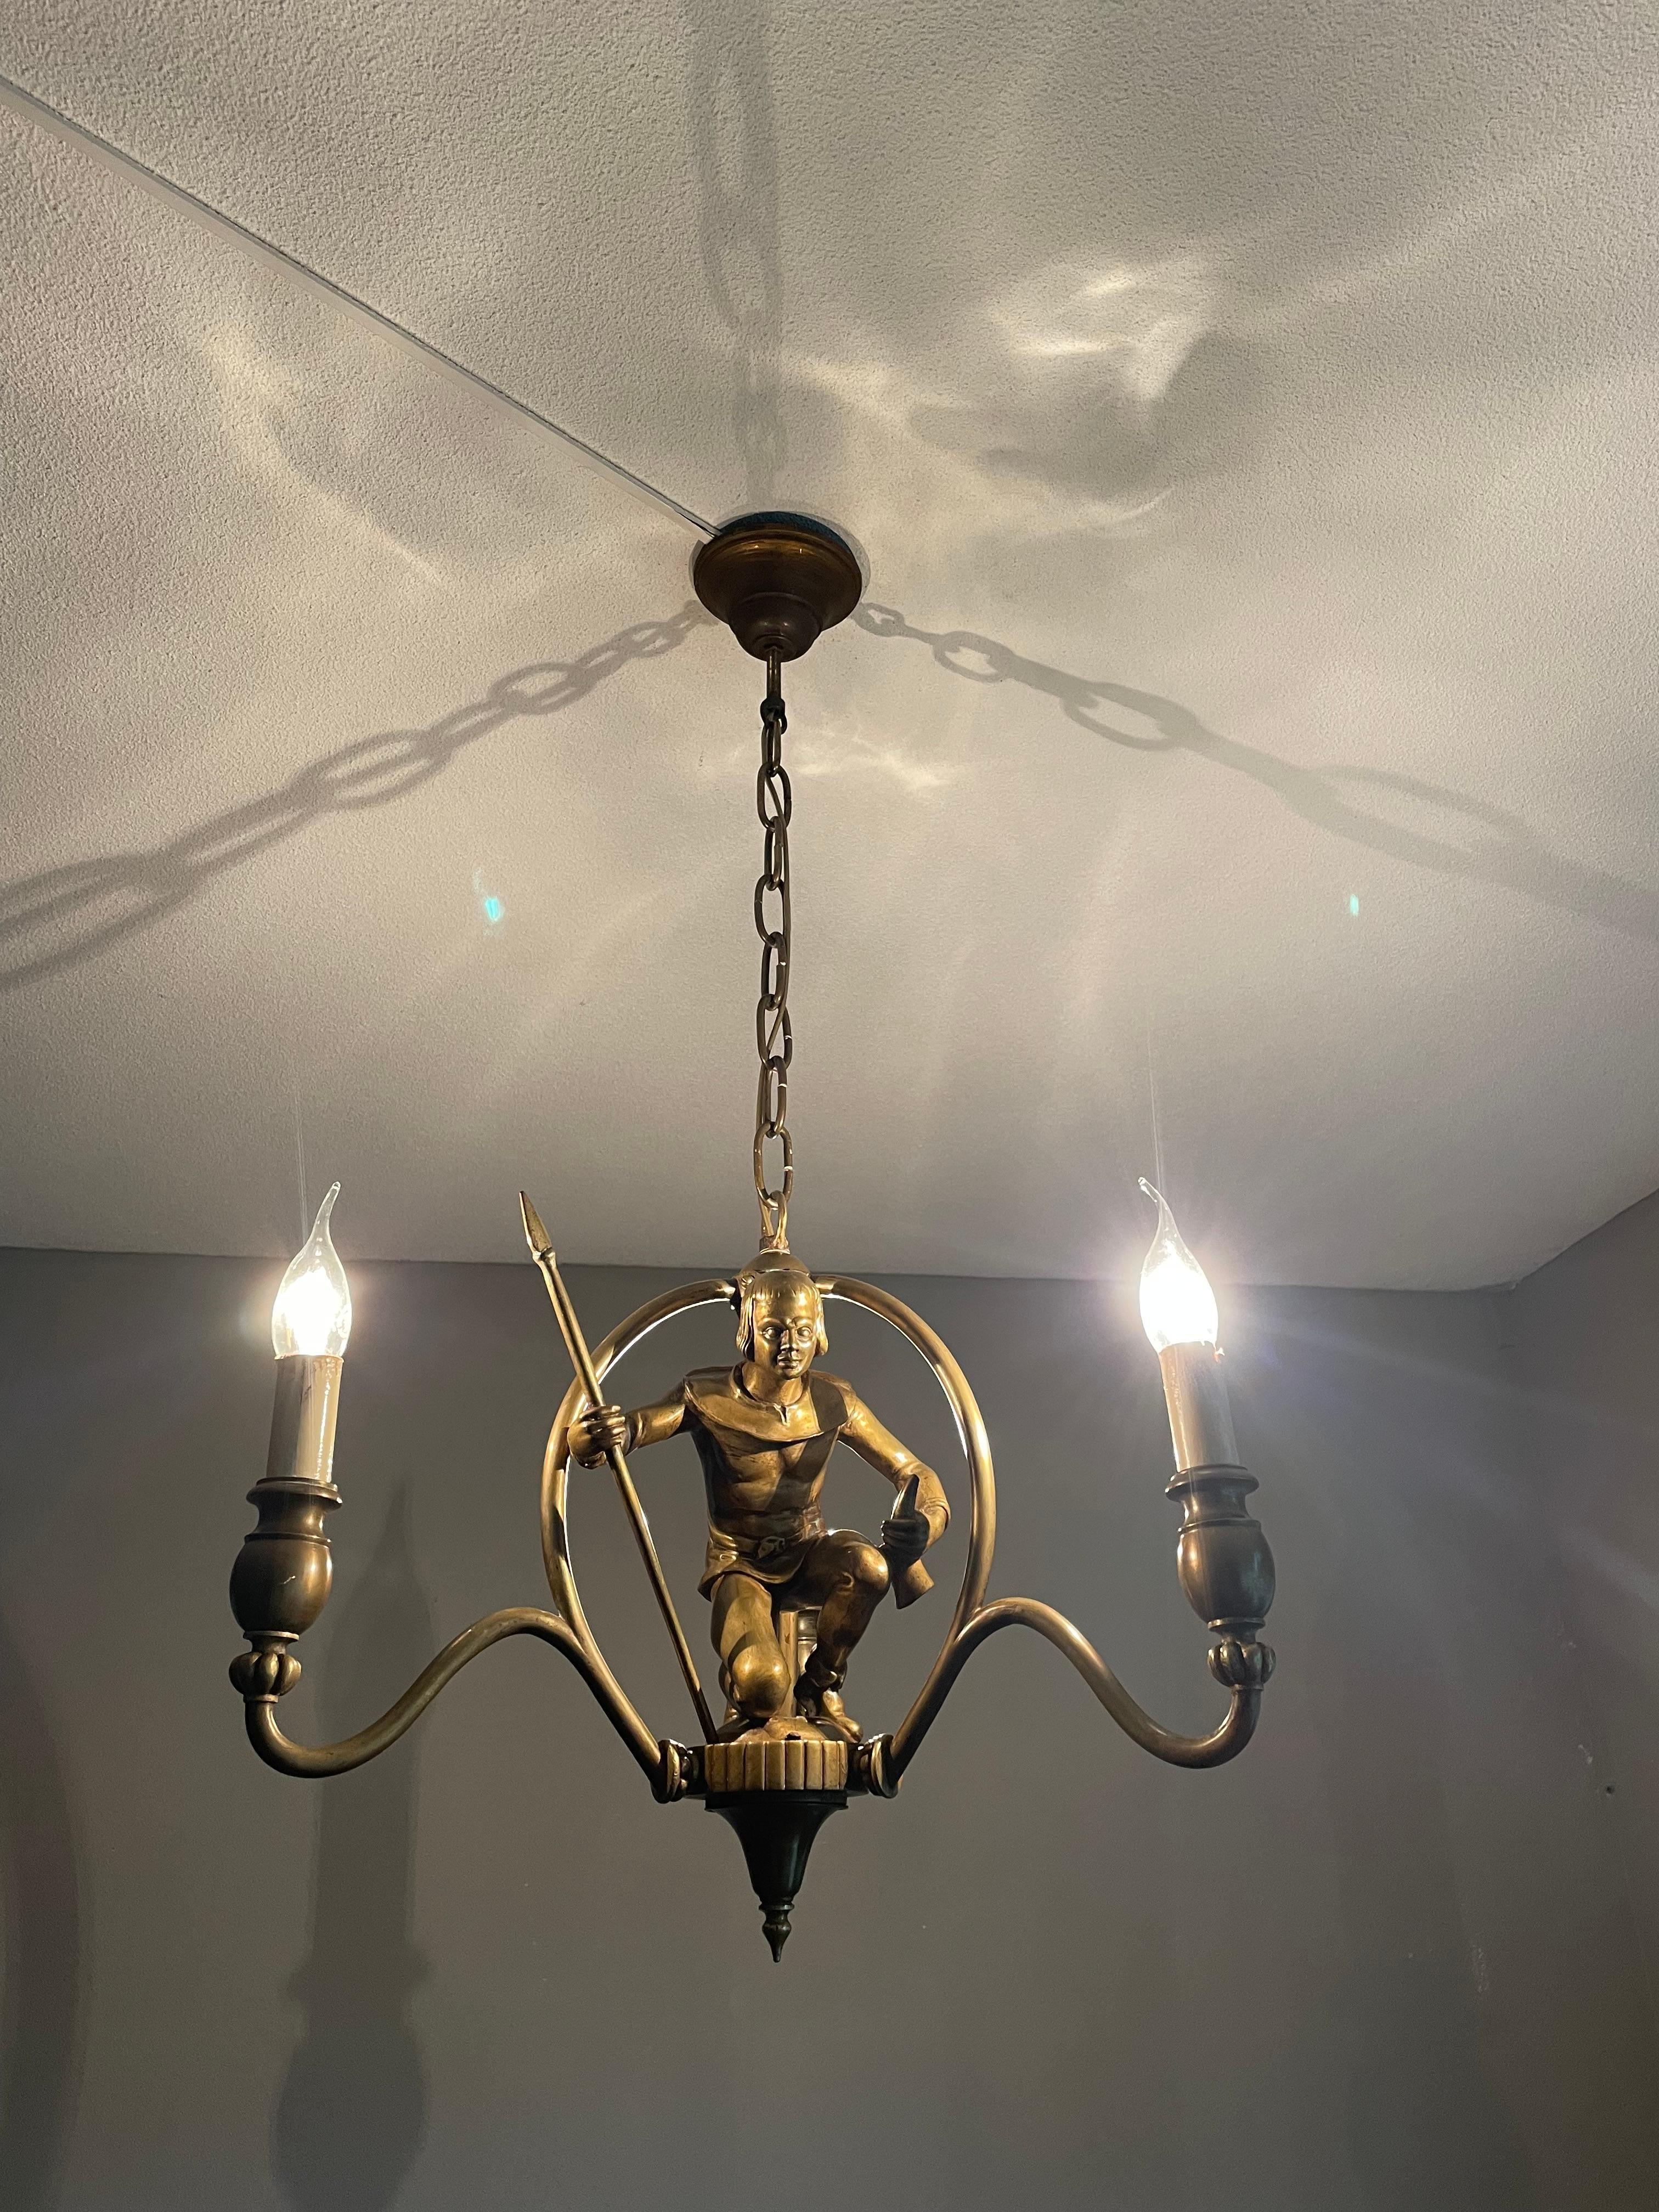 Stylish and highly decorative three-light Medieval Style fixture.

With early 20th century lighting as one of our specialities, we have seen a lot of great and unique fixtures, but never did we come across a handcrafted, Gothic Revival pendant with